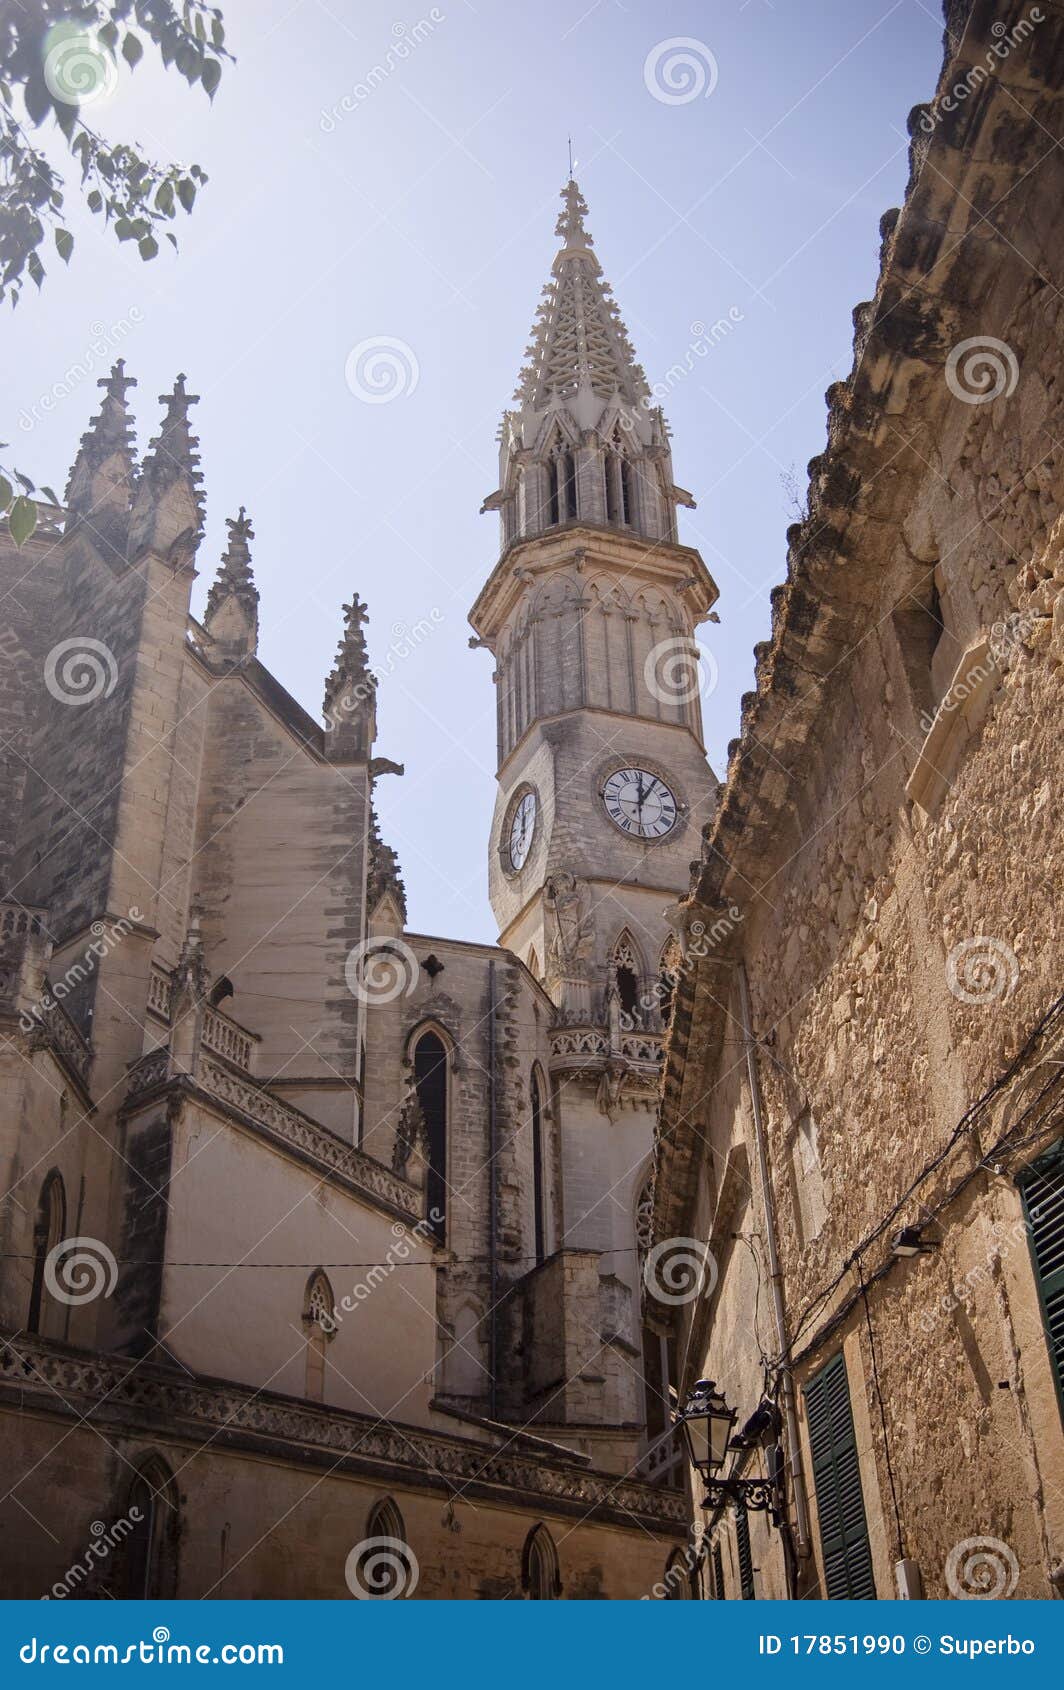 manacor cathedral belfry